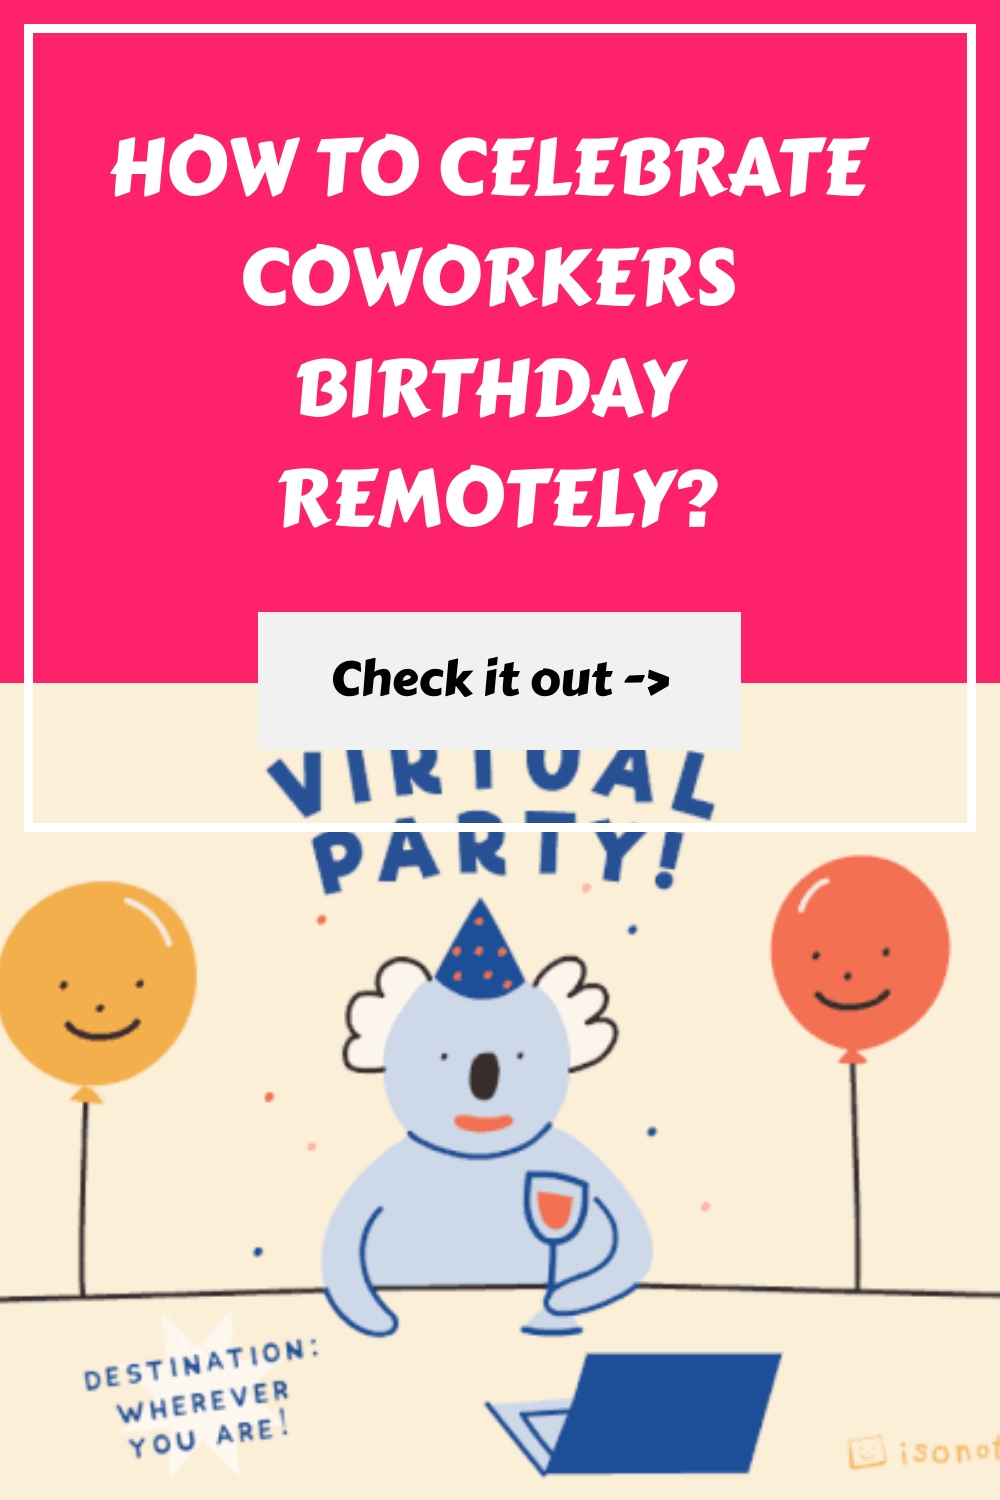 How To Celebrate Coworkers Birthday Remotely generated pin 1184